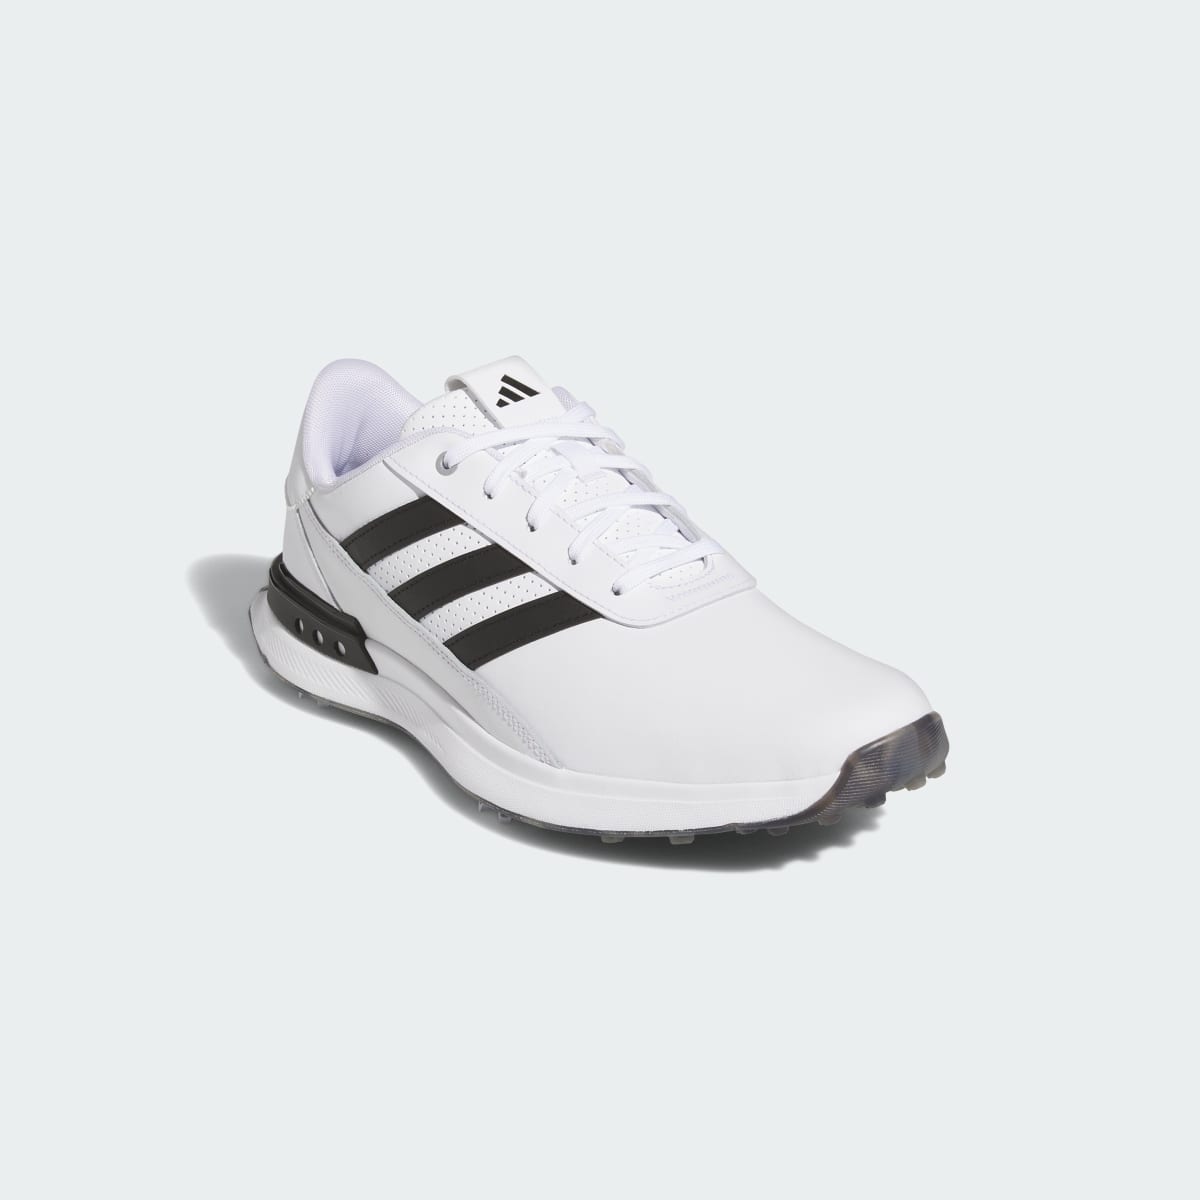 Adidas S2G 24 Golf Shoes. 8